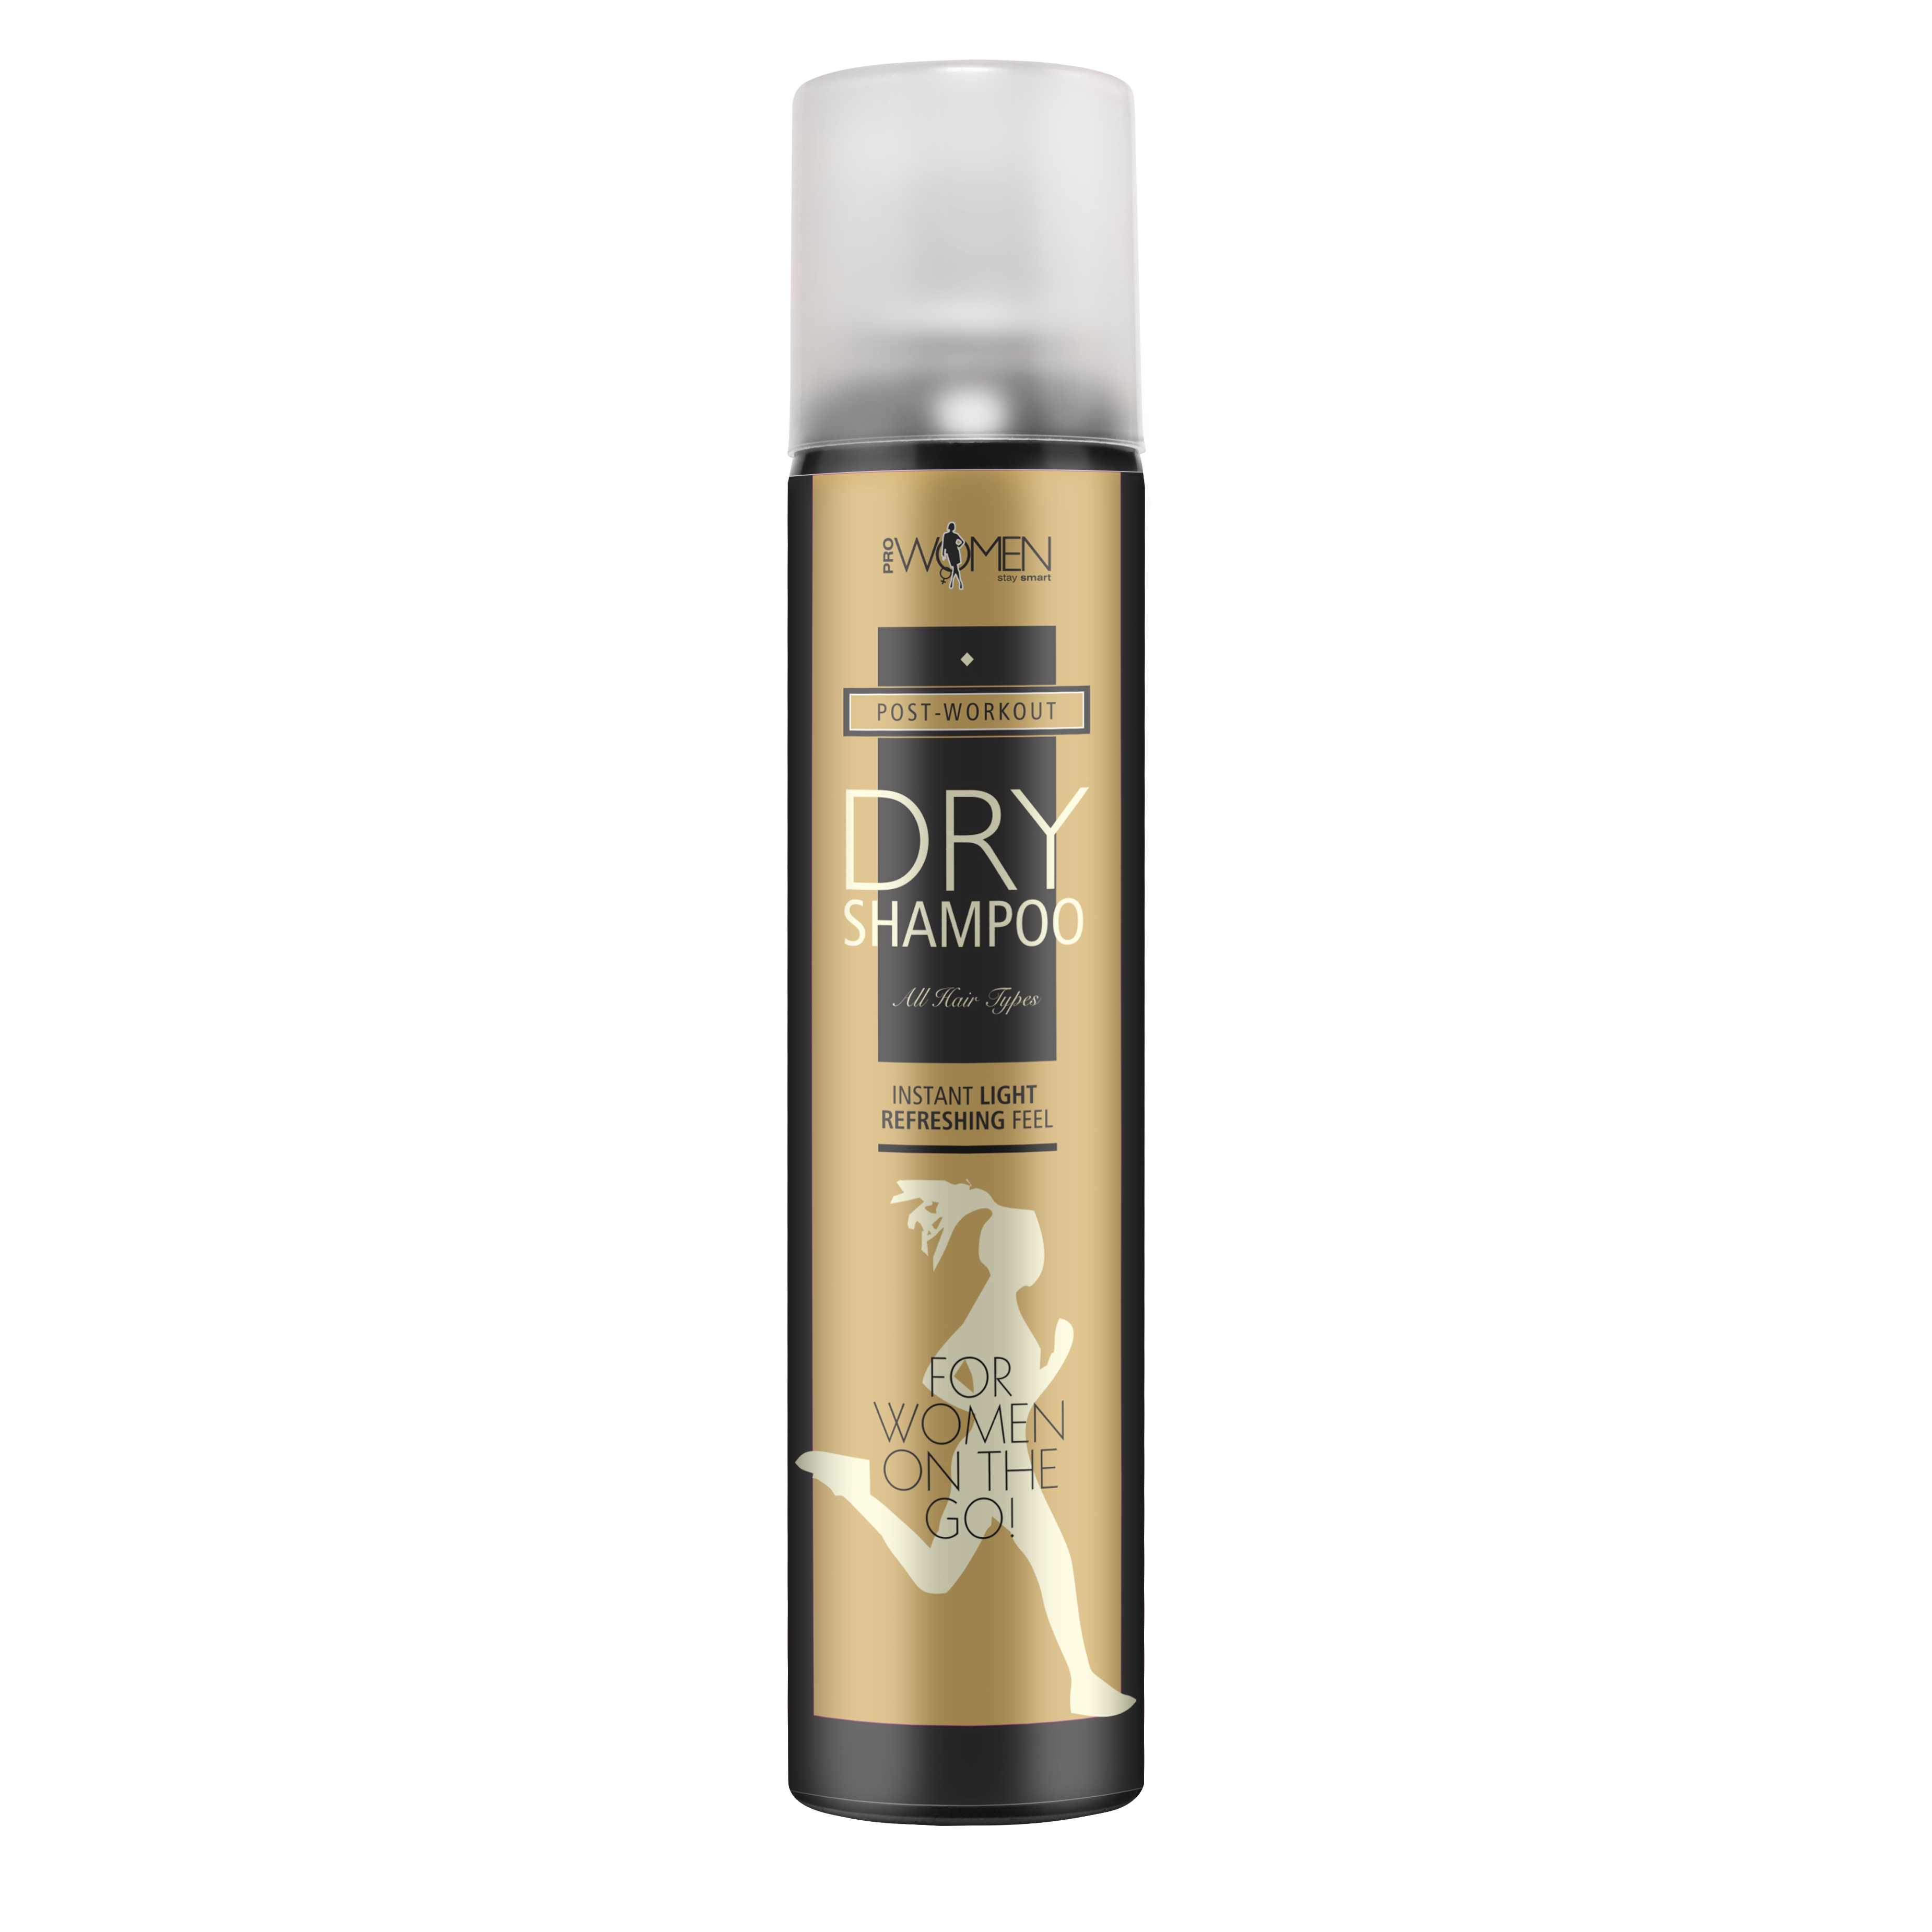 Dry Shampoo Post Work out Gym Variant 195 ml